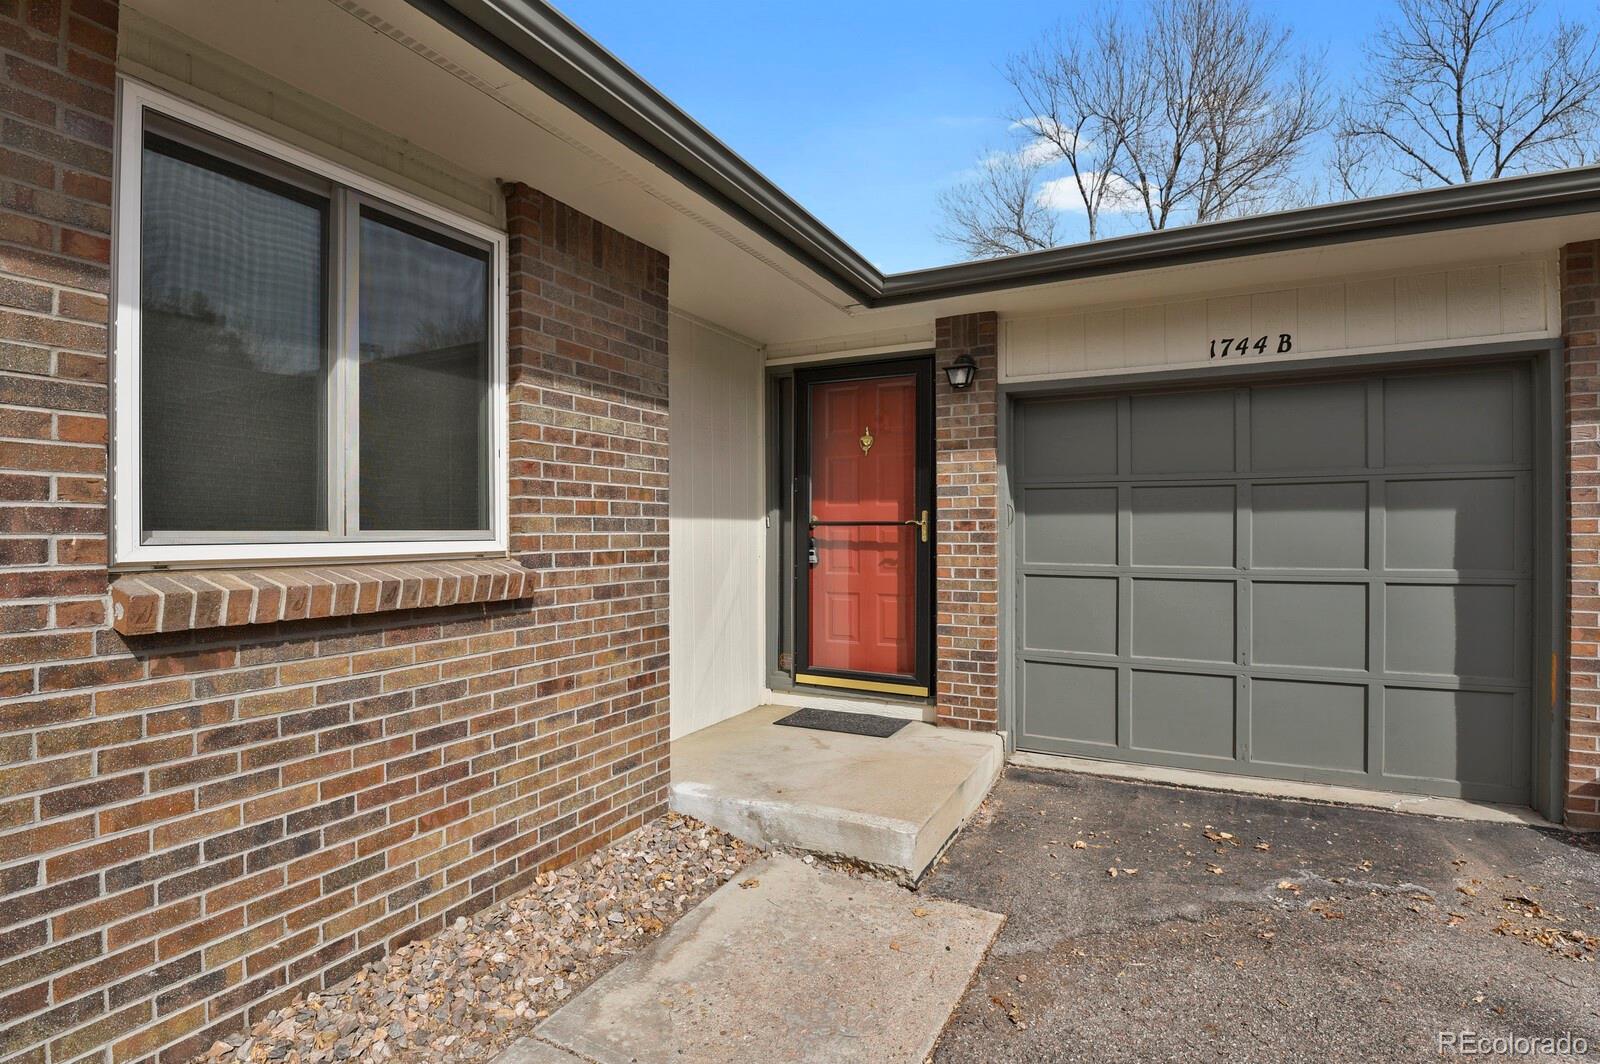 Report Image for 1744 S Ammons Street,Lakewood, Colorado